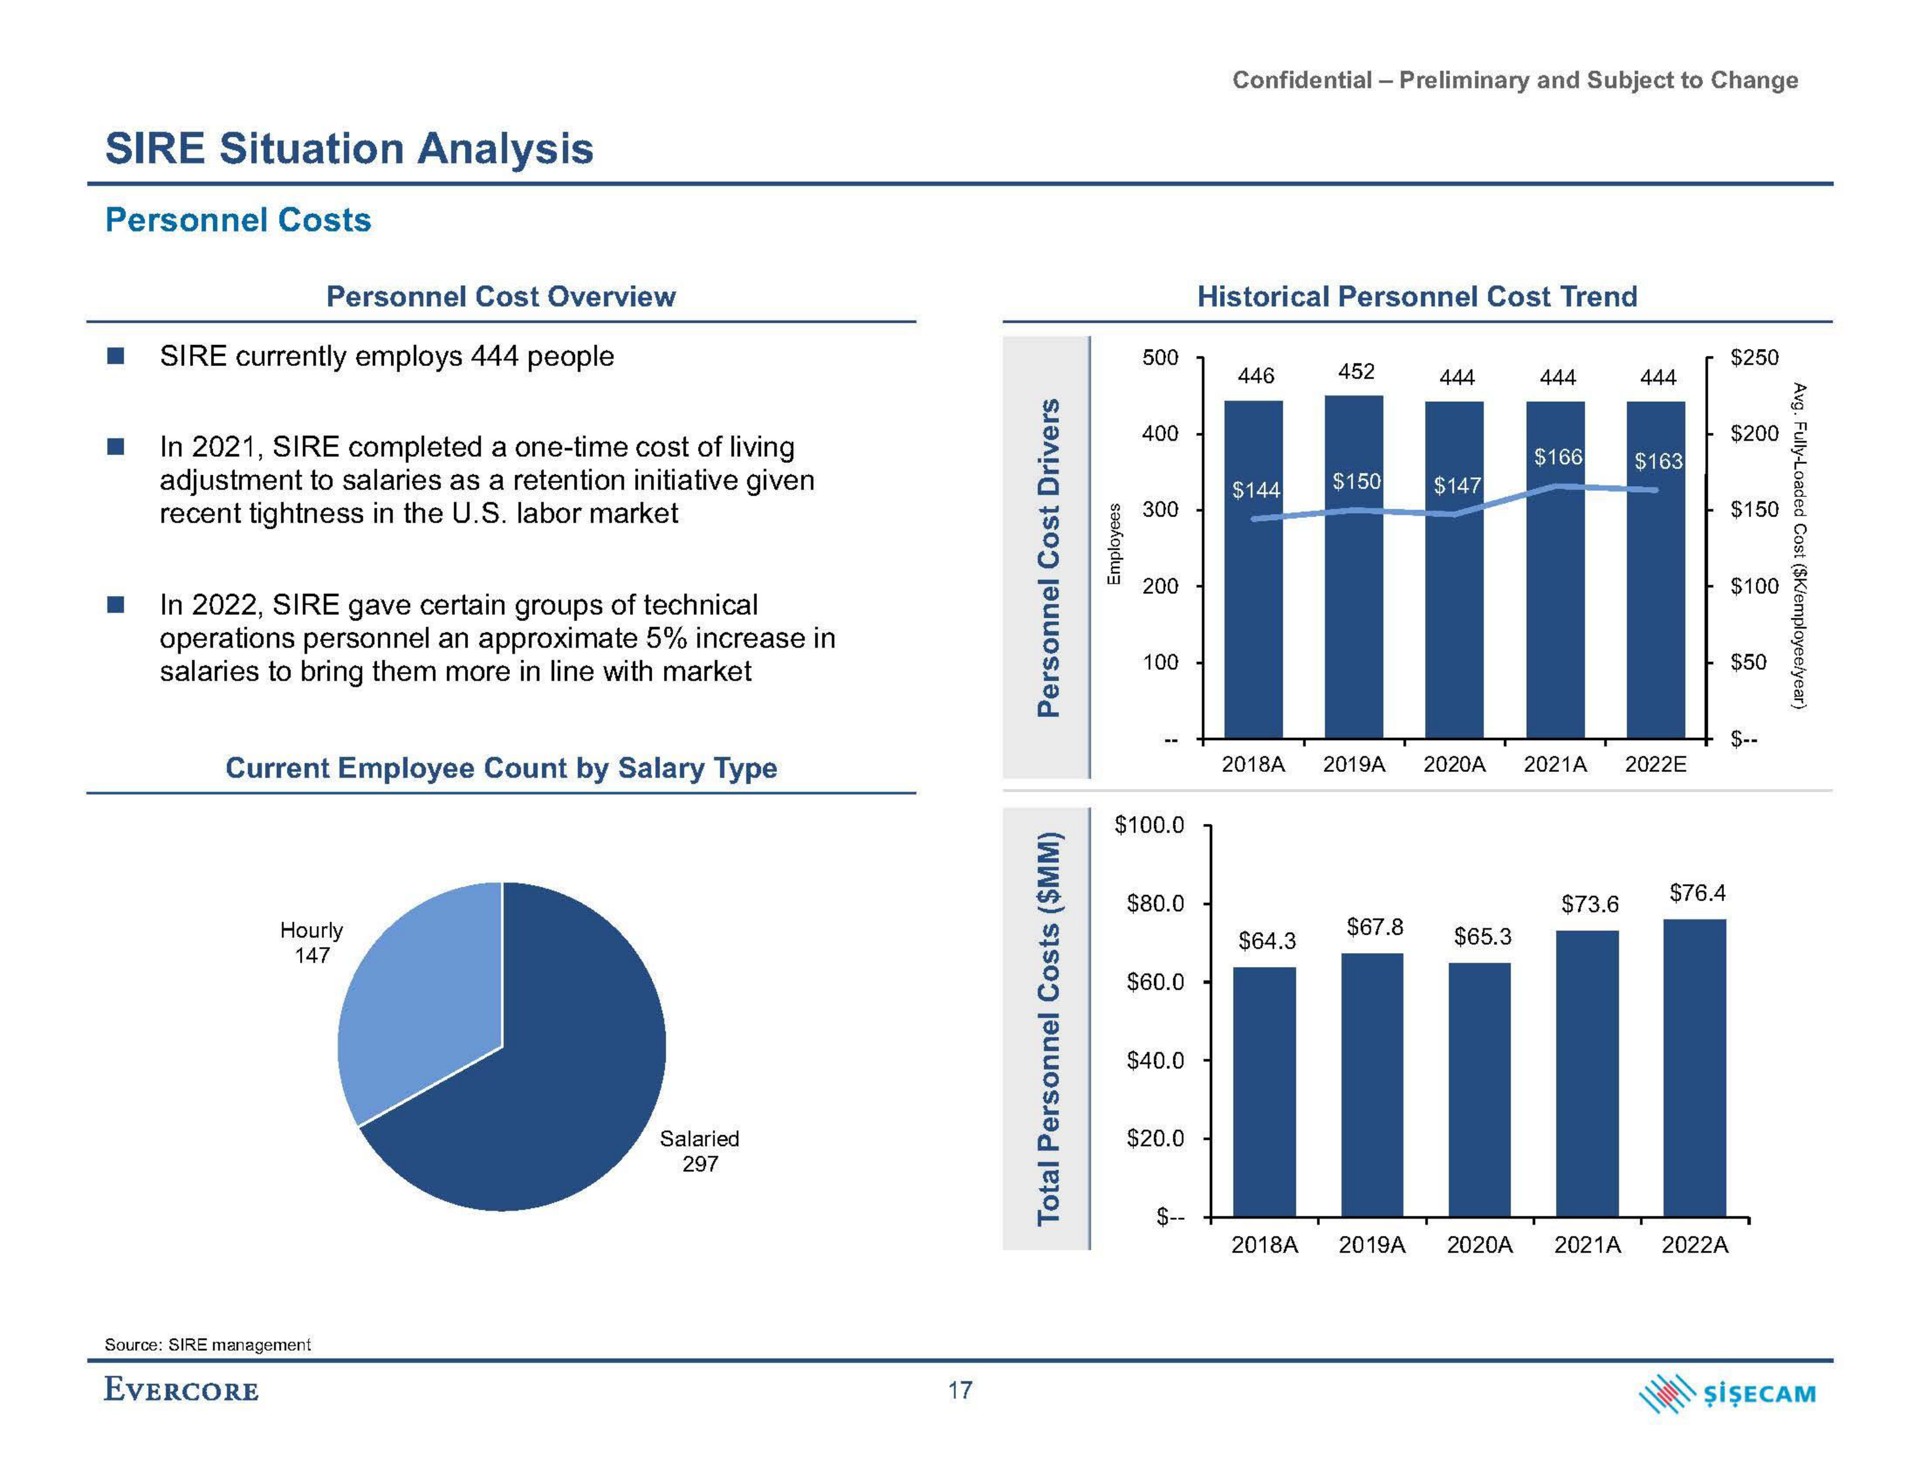 sire situation analysis recent tightness in the labor market salaries to bring them more in line with market | Evercore